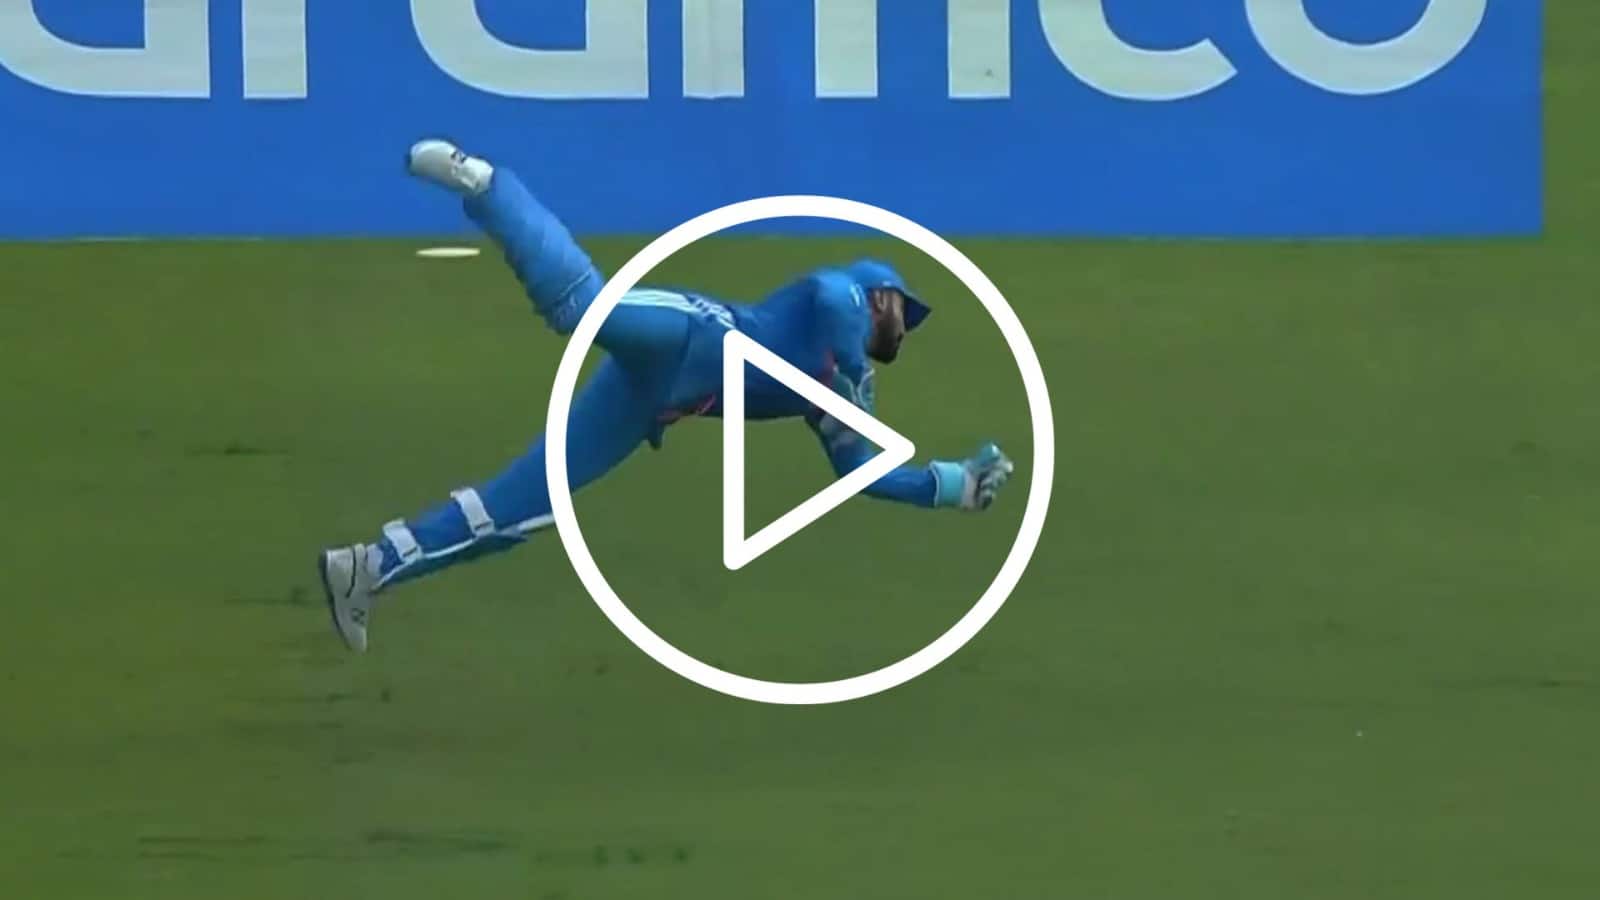 [Watch] KL Rahul's Jaw-Dropping Flying Catch as Mohammed Siraj Roars